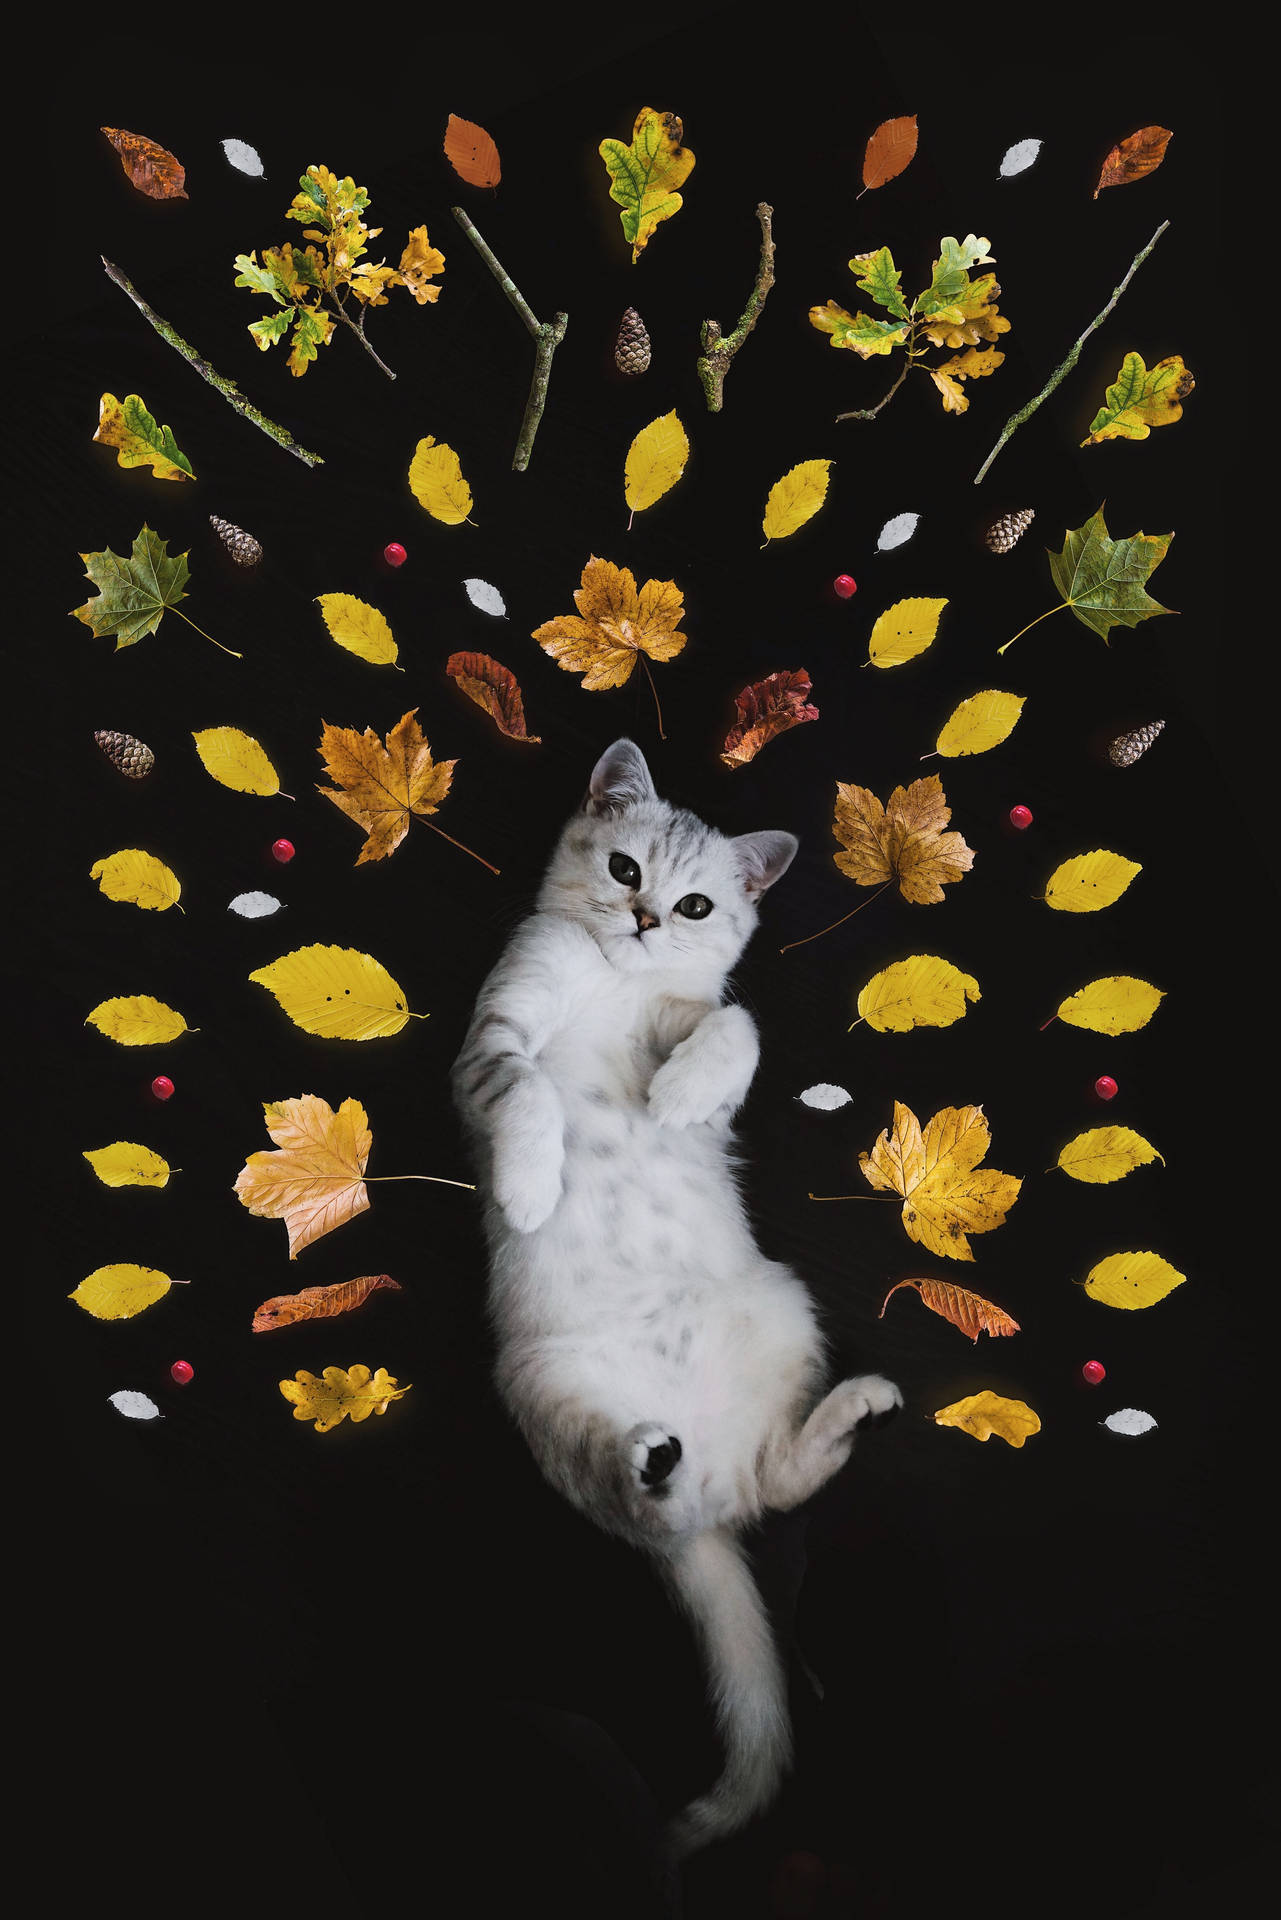 Cute Kitten Surrounded By Leaves